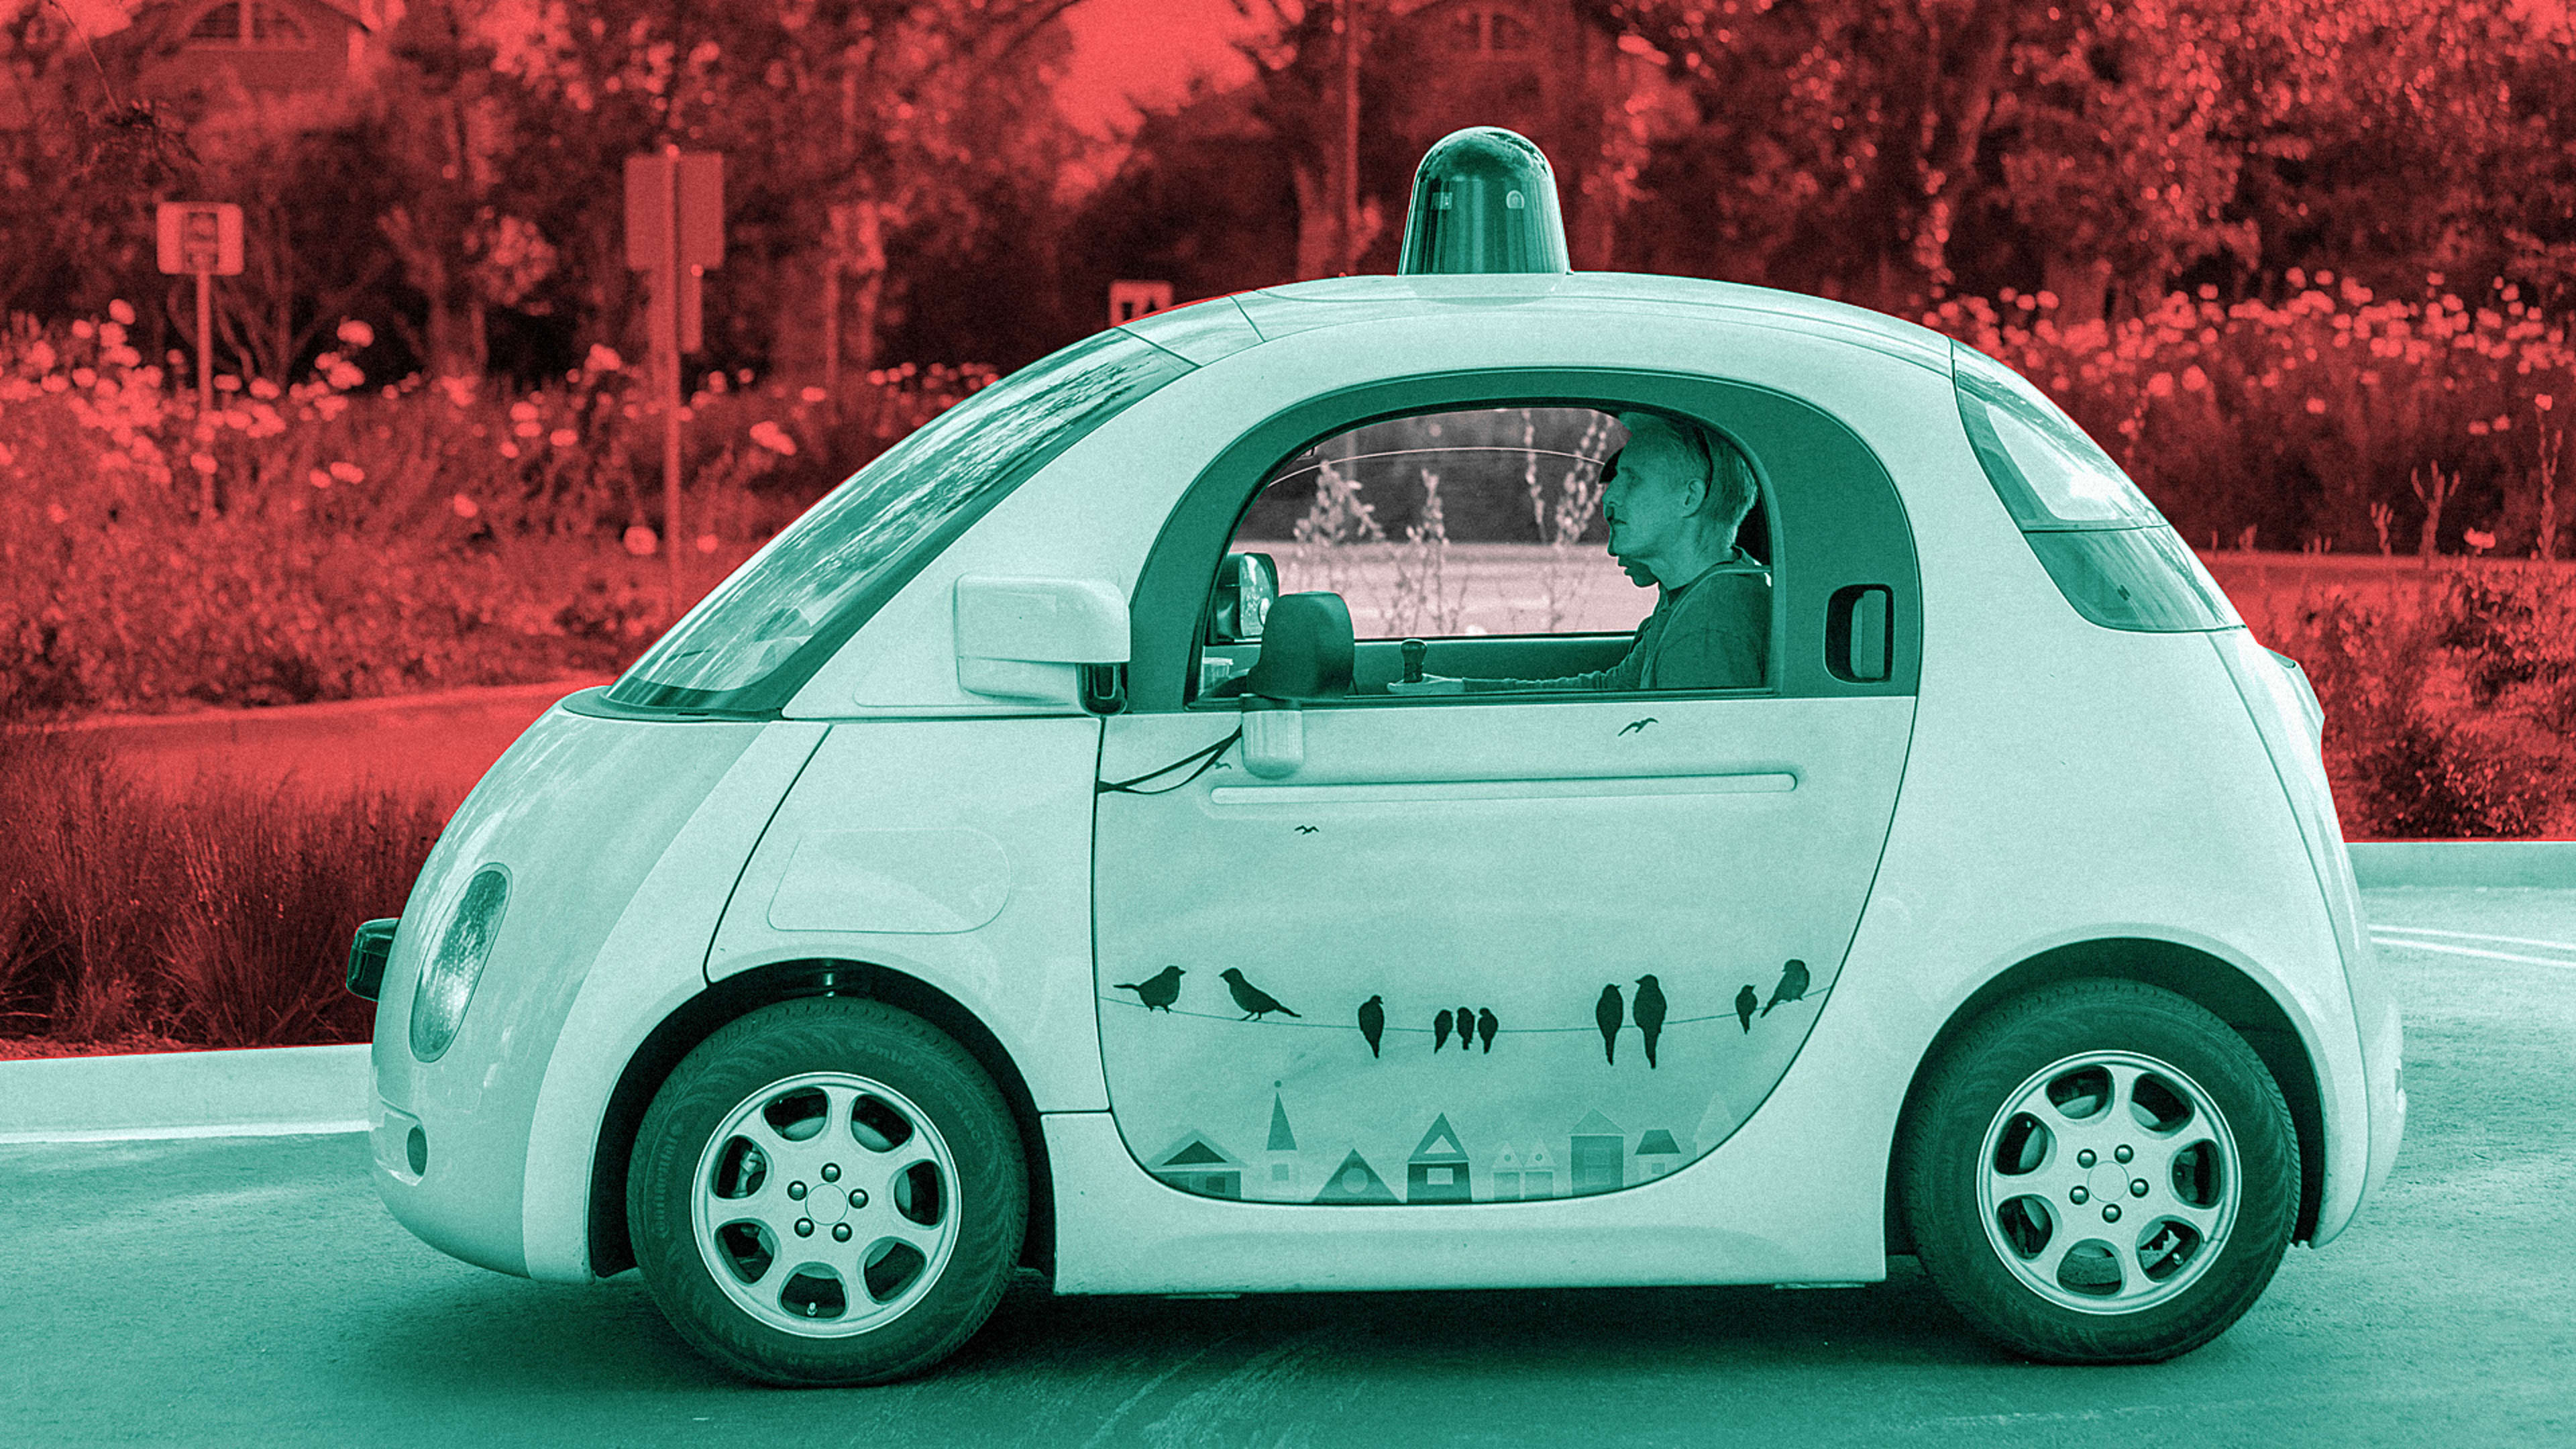 It Could Be 10 Times Cheaper To Take Electric Robo-Taxis Than To Own A Car By 2030